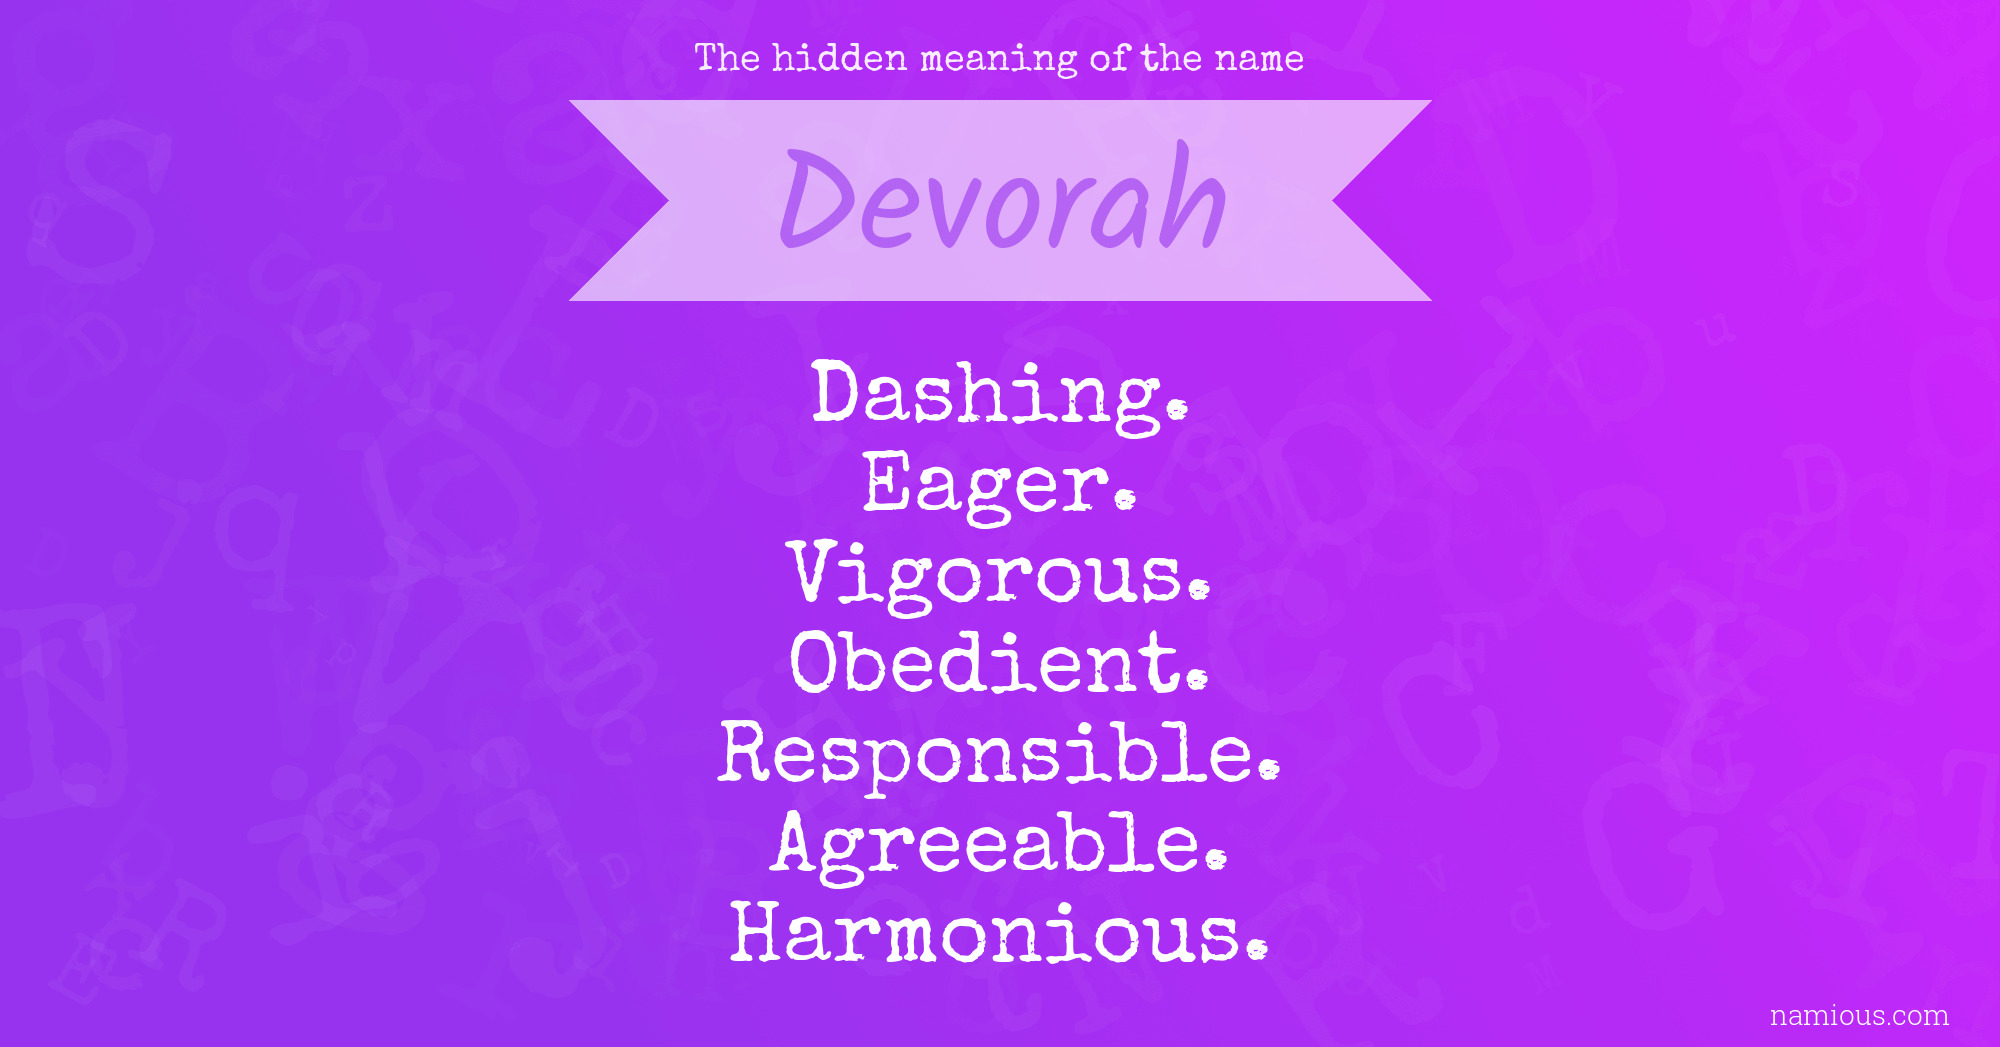 The hidden meaning of the name Devorah